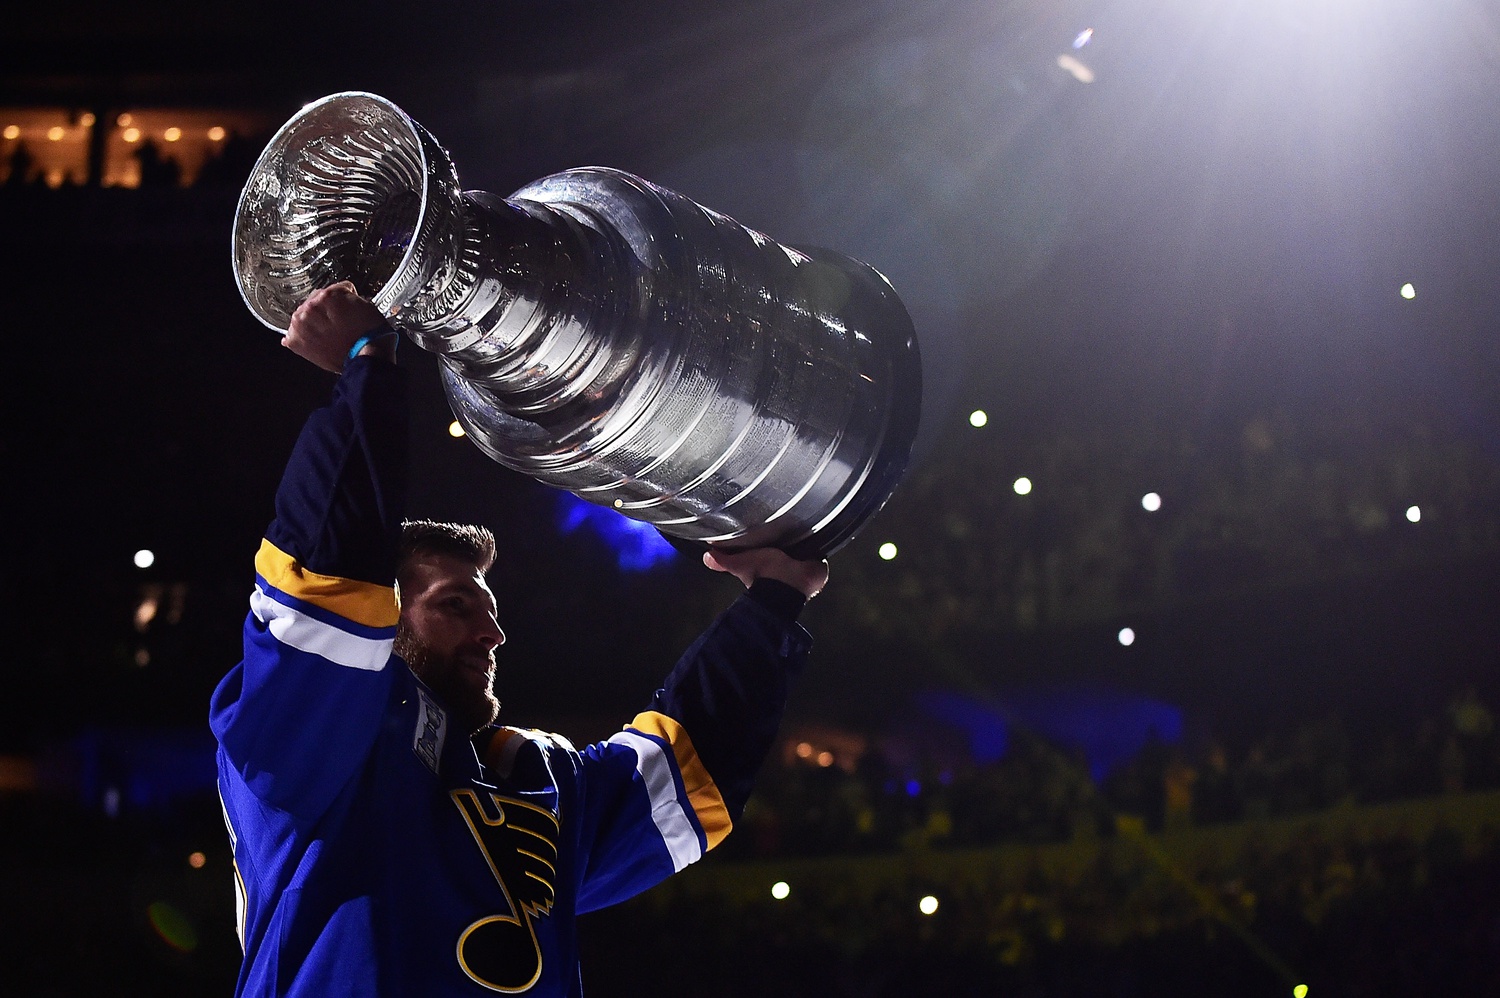 Fox Sports Midwest to air 2019 Blues-Jets and Stanley Cup Final games